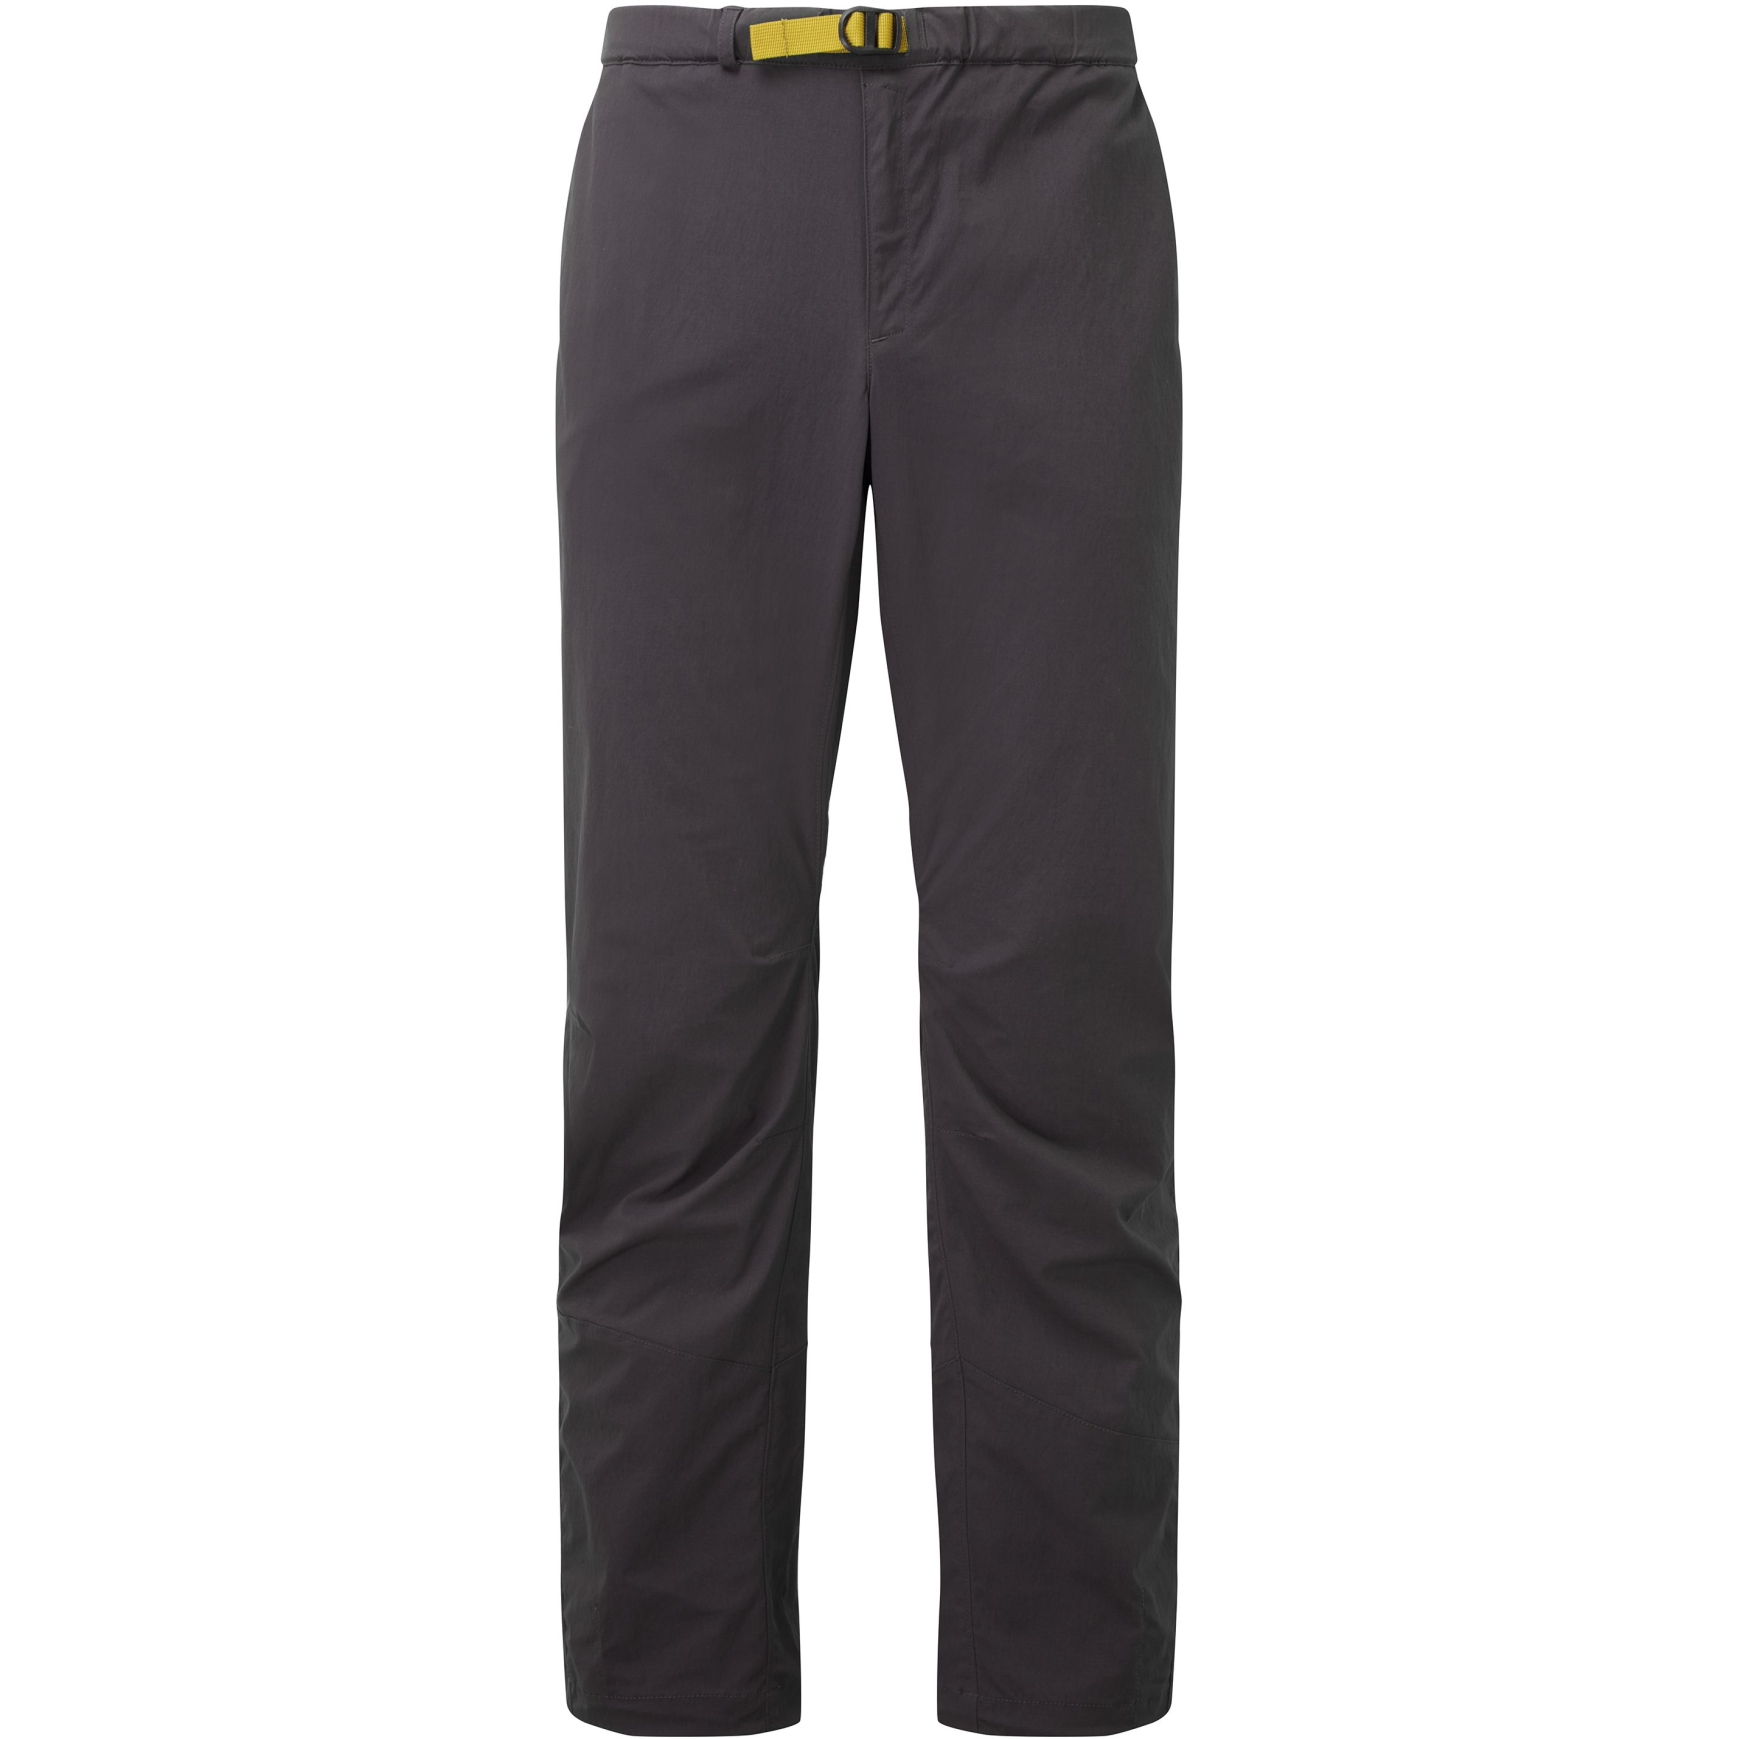 Image of Mountain Equipment Dihedral Pants Men ME-006721 - long - obsidian